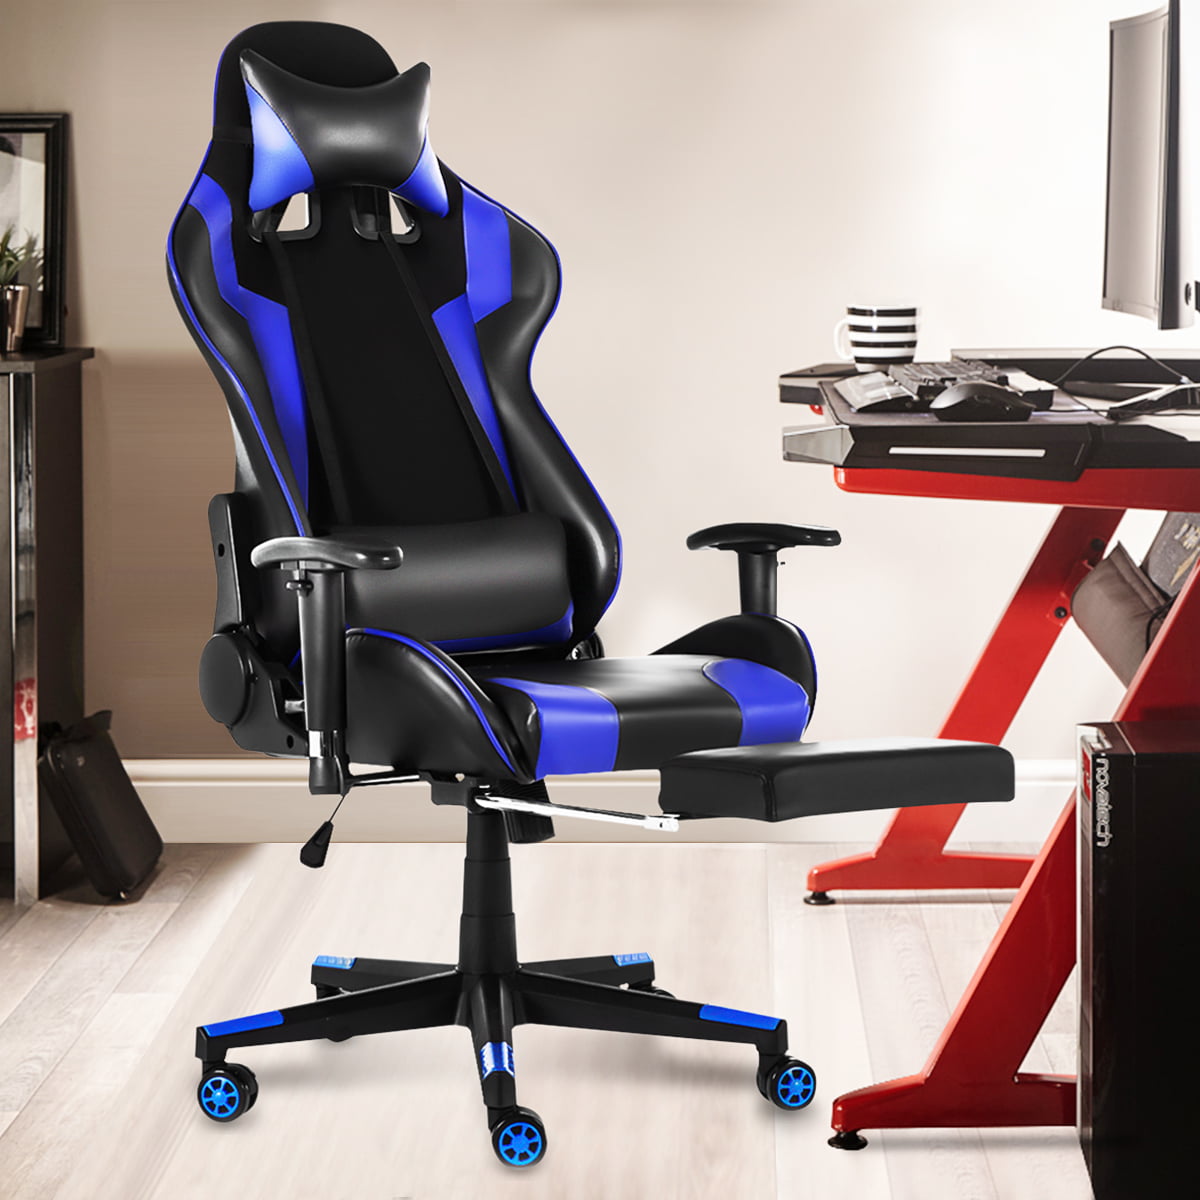 GAMING RACING CHAIR LEATHER EXECUTIVE RECLINER SWIVEL OFFICE COMPUTER FOOTREST 